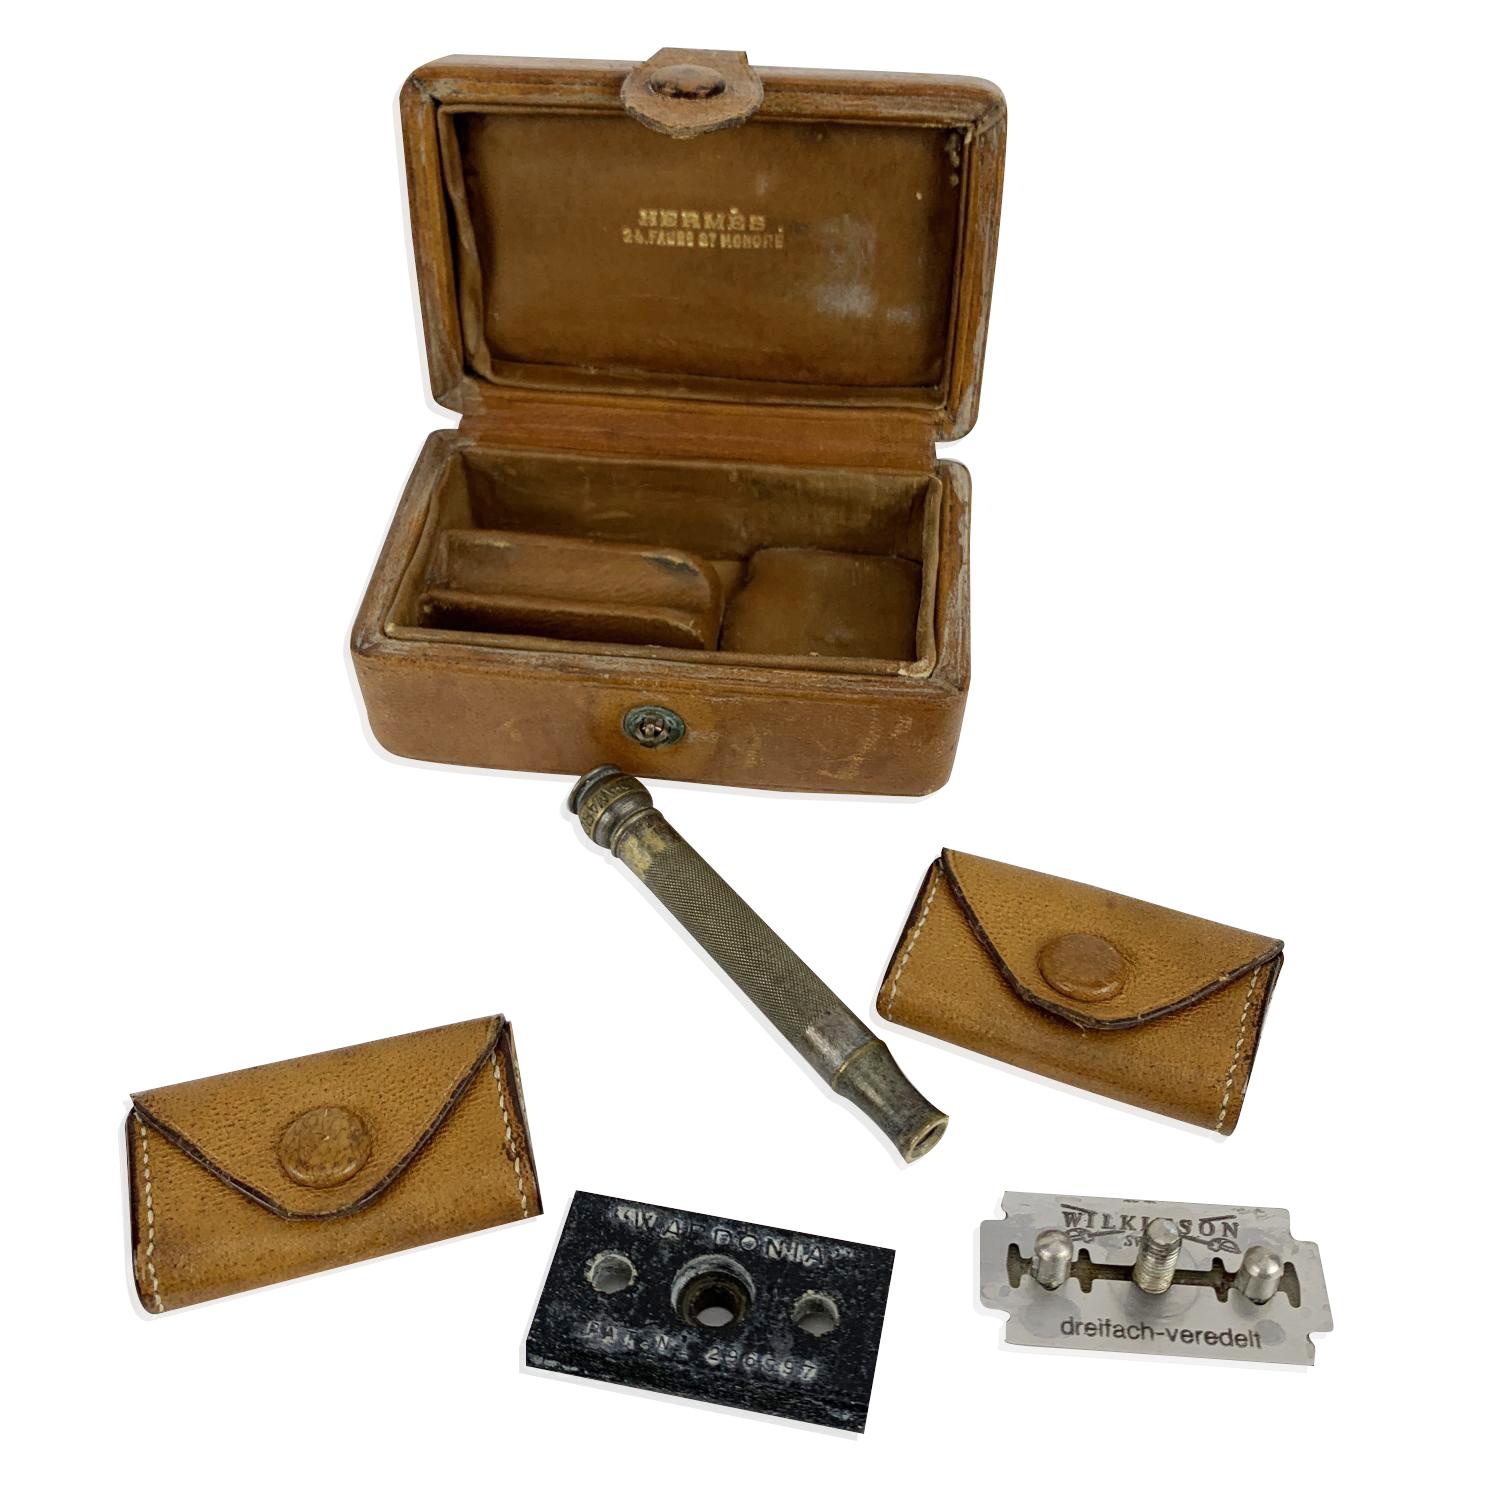 Rare and hard to find vintage travel razor in case by Hermes - Paris. Possibly dating back to the 1940s. Two piece 'Wardonia - Sheffield' safety razor in metal. The razor comes in a brown leather case, marked 'Hermes - 24 Faubo. St Honoré' on the